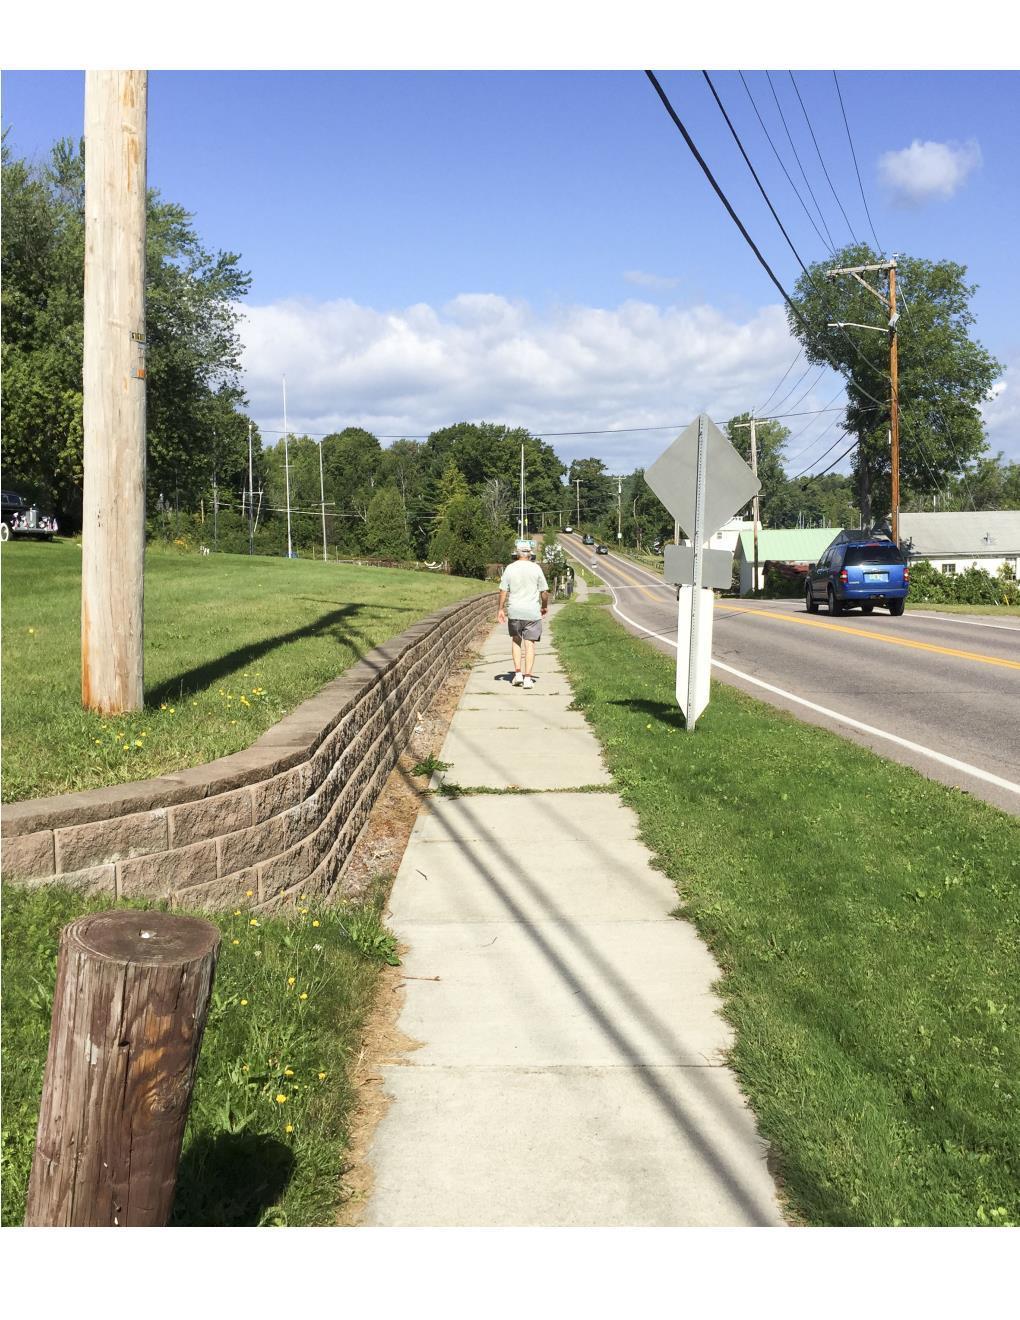 West Lakeshore Drive Bicycle and Pedestrian Facilities Goals Improve safety and mobility for bicyclists and pedestrians